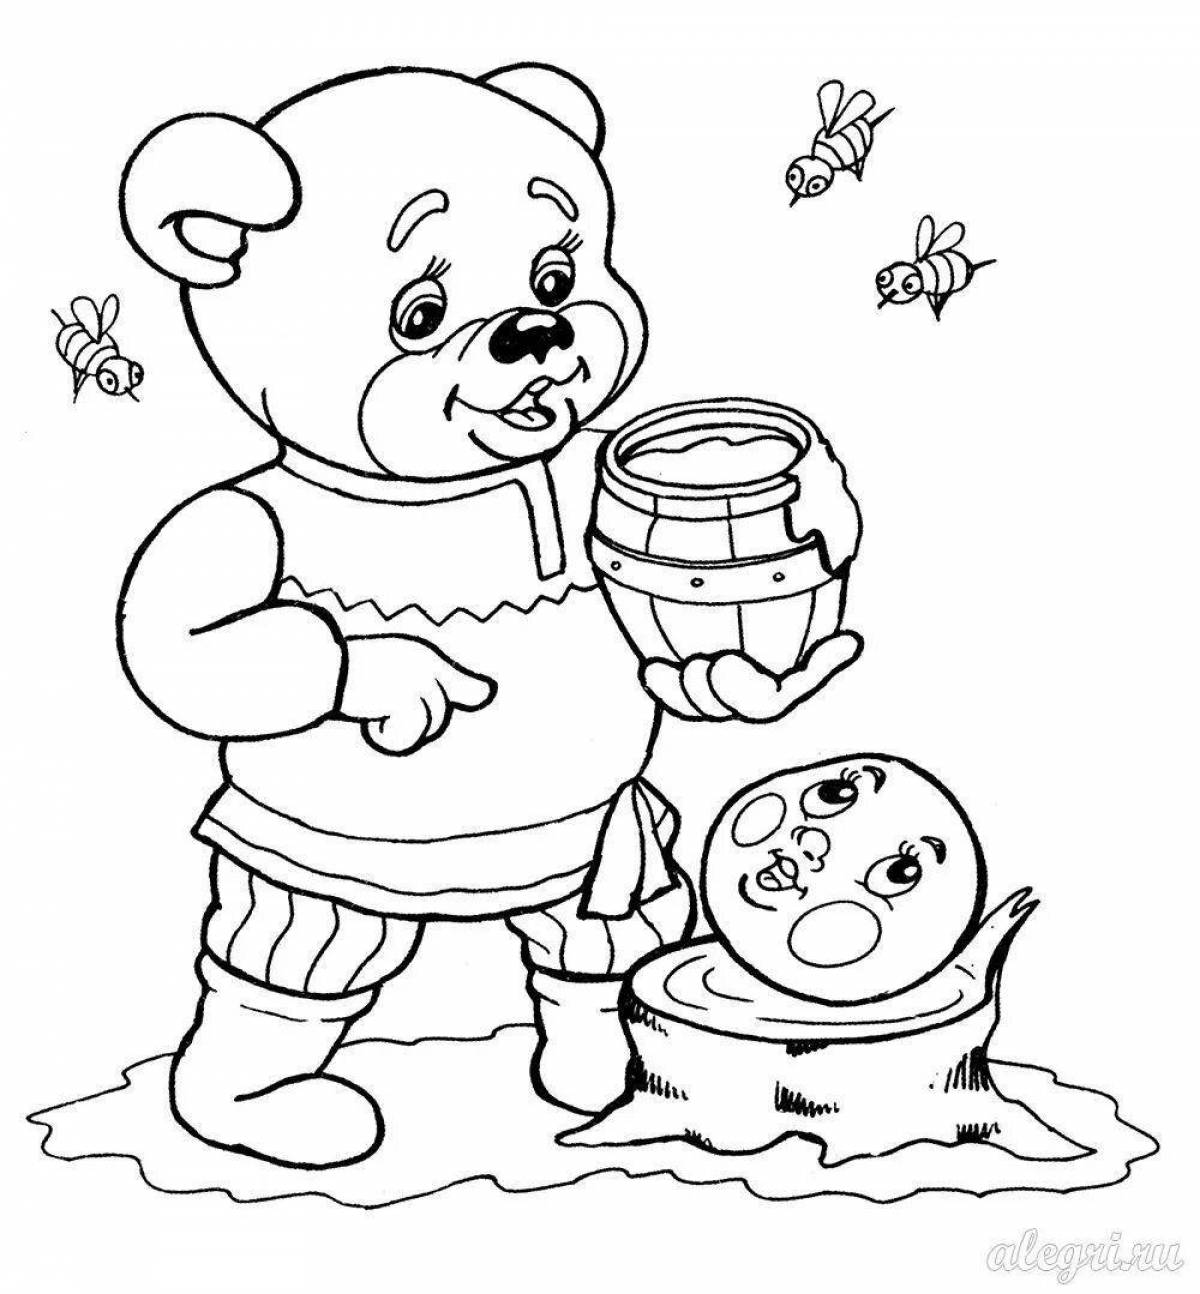 Coloring book funny gingerbread man for children 2-3 years old